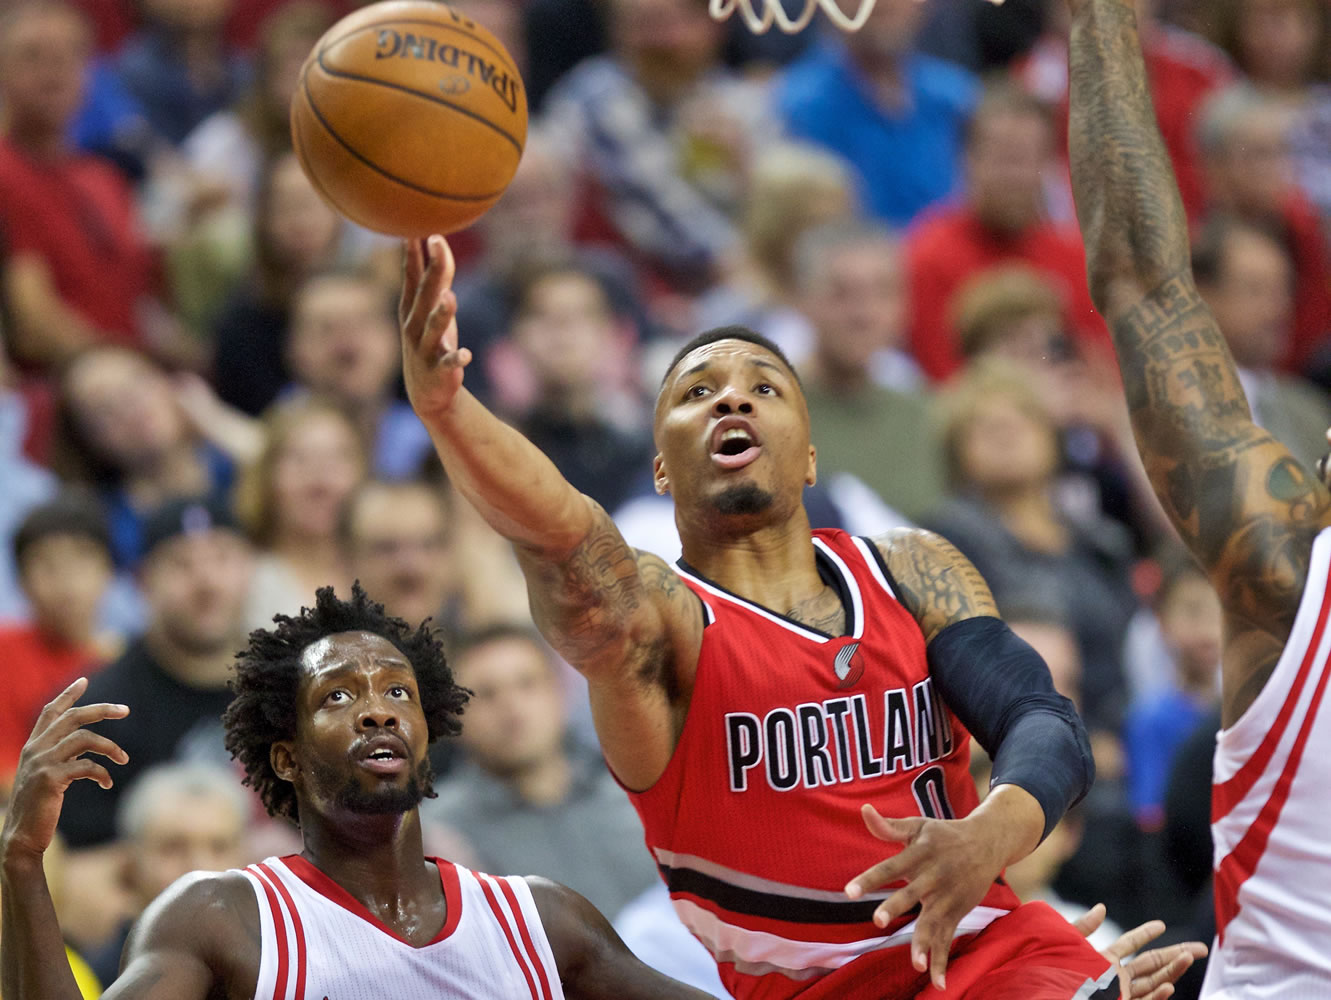 Portland Trail Blazers guard Damian Lillard shoots over Houston Rockets guard Patrick Beverley, left, during the second half of an NBA basketball game in Portland, Ore., Thursday, Feb. 25, 2016.